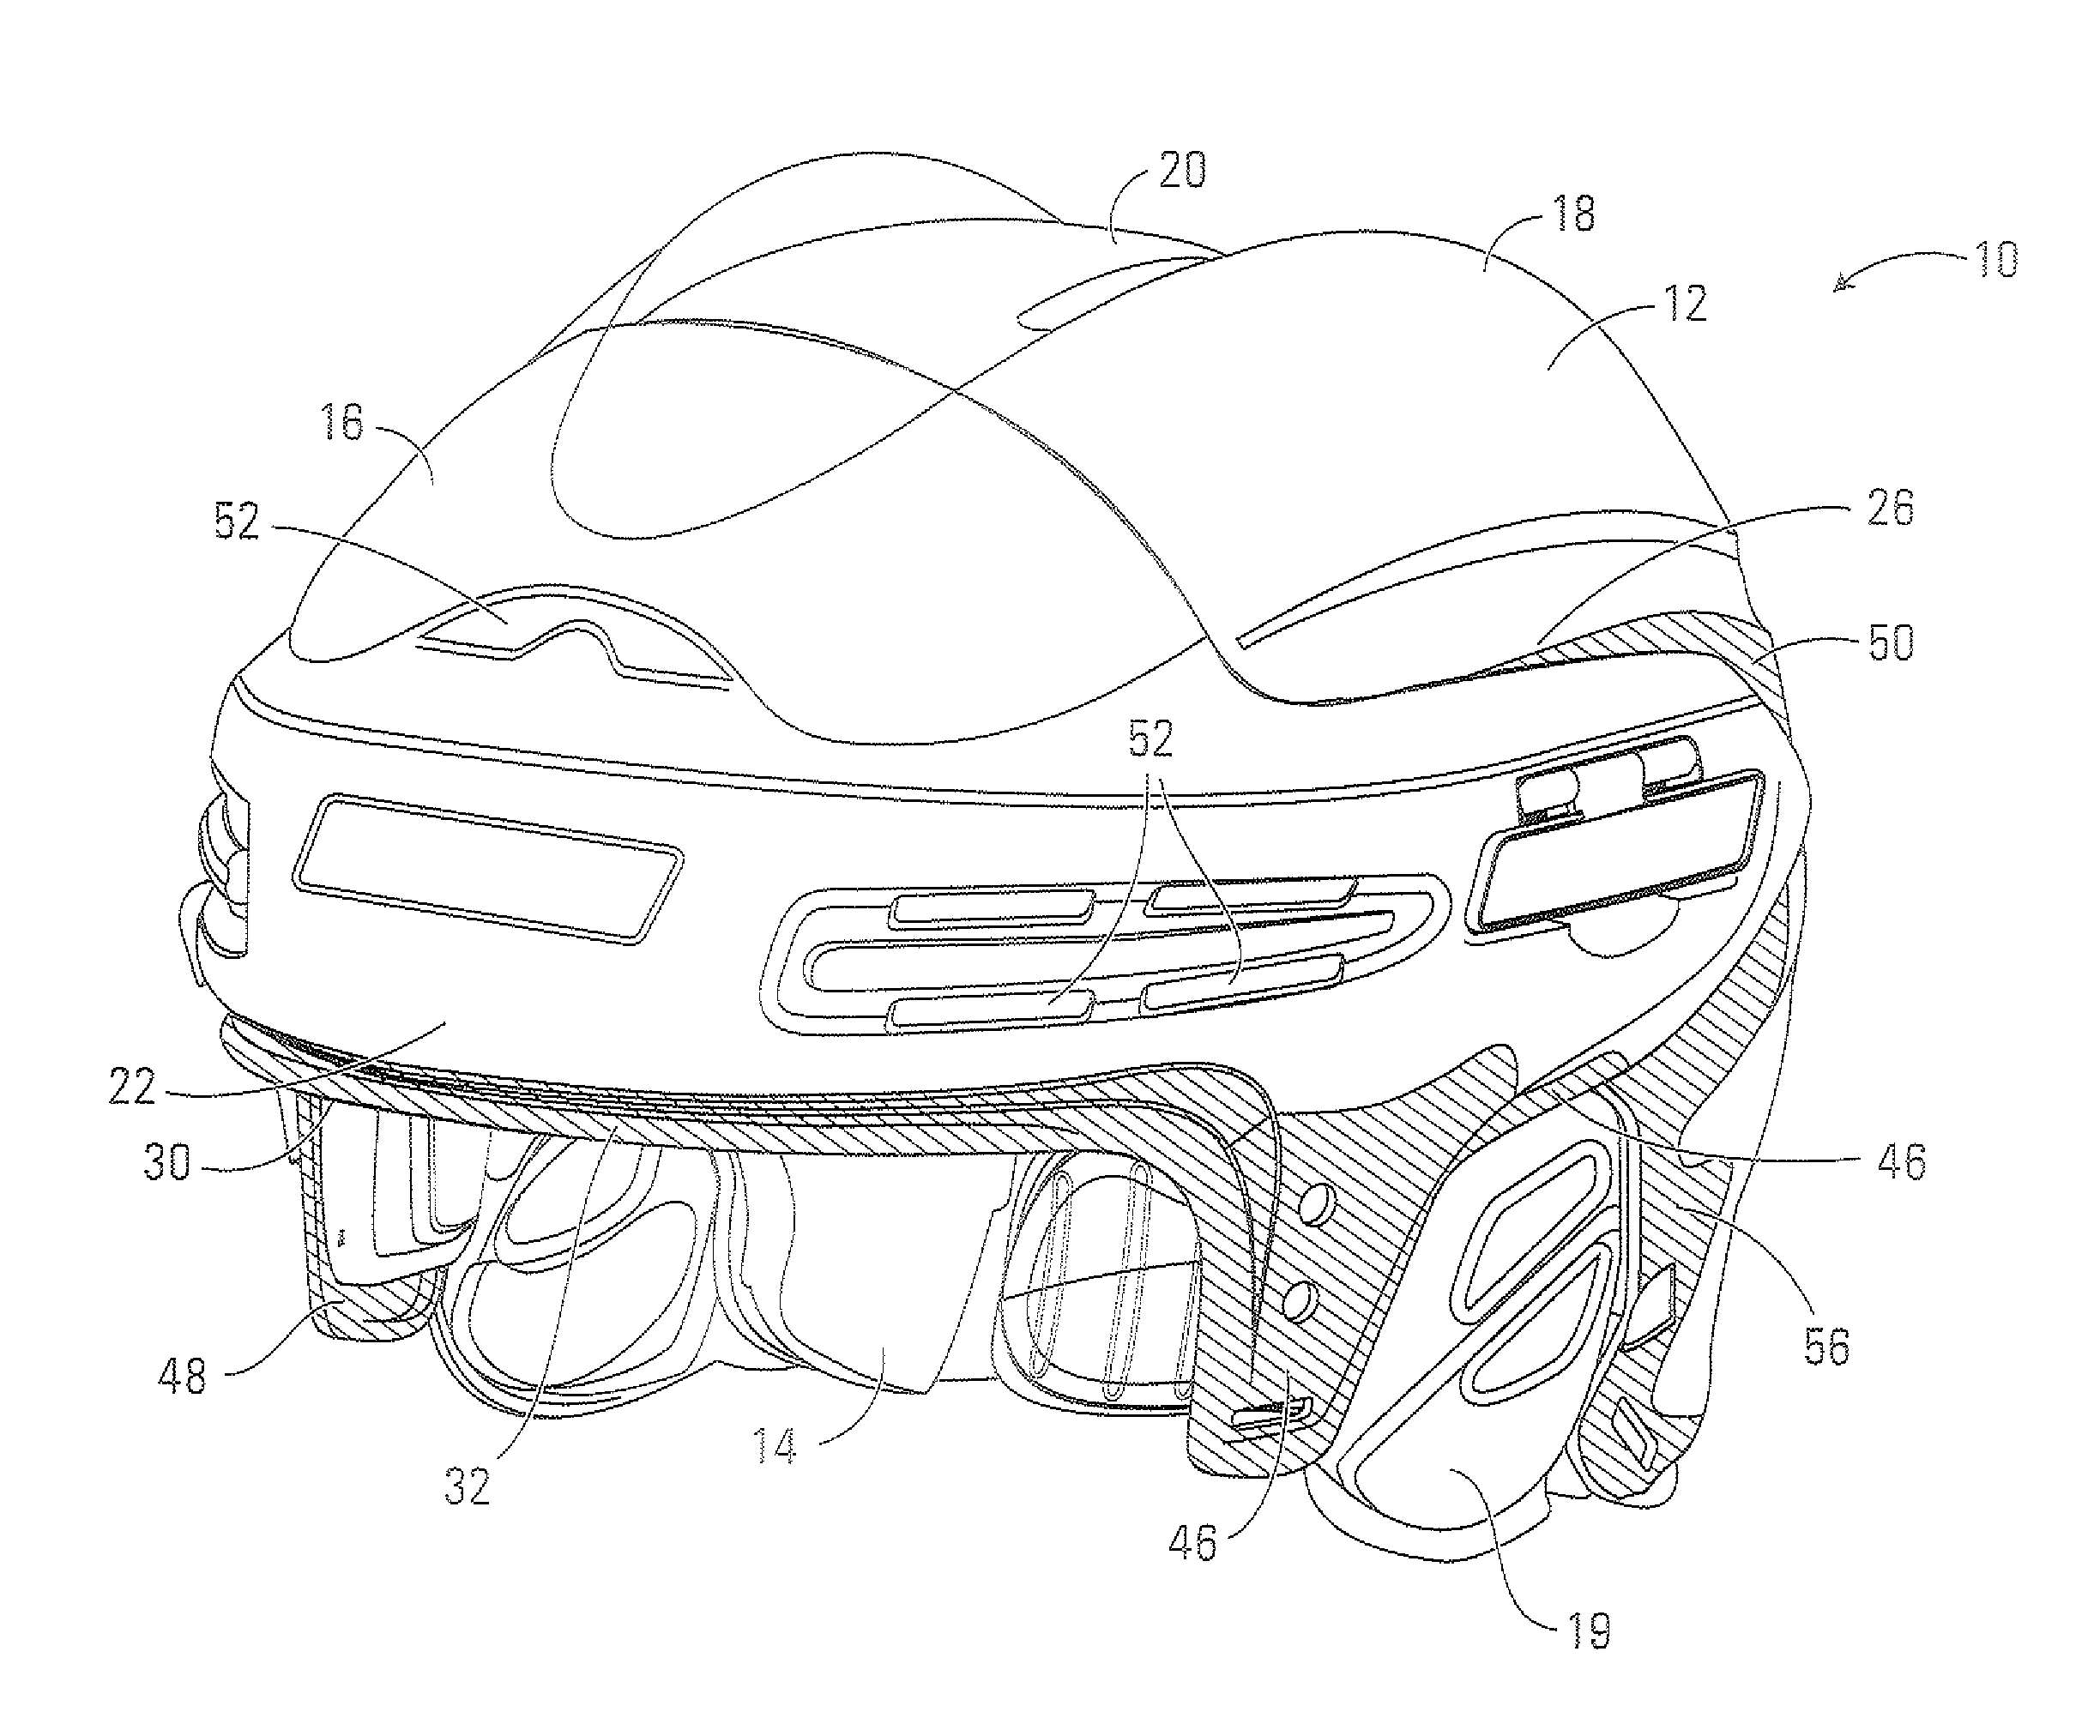 Hockey helmet with an outer shell made of two different materials